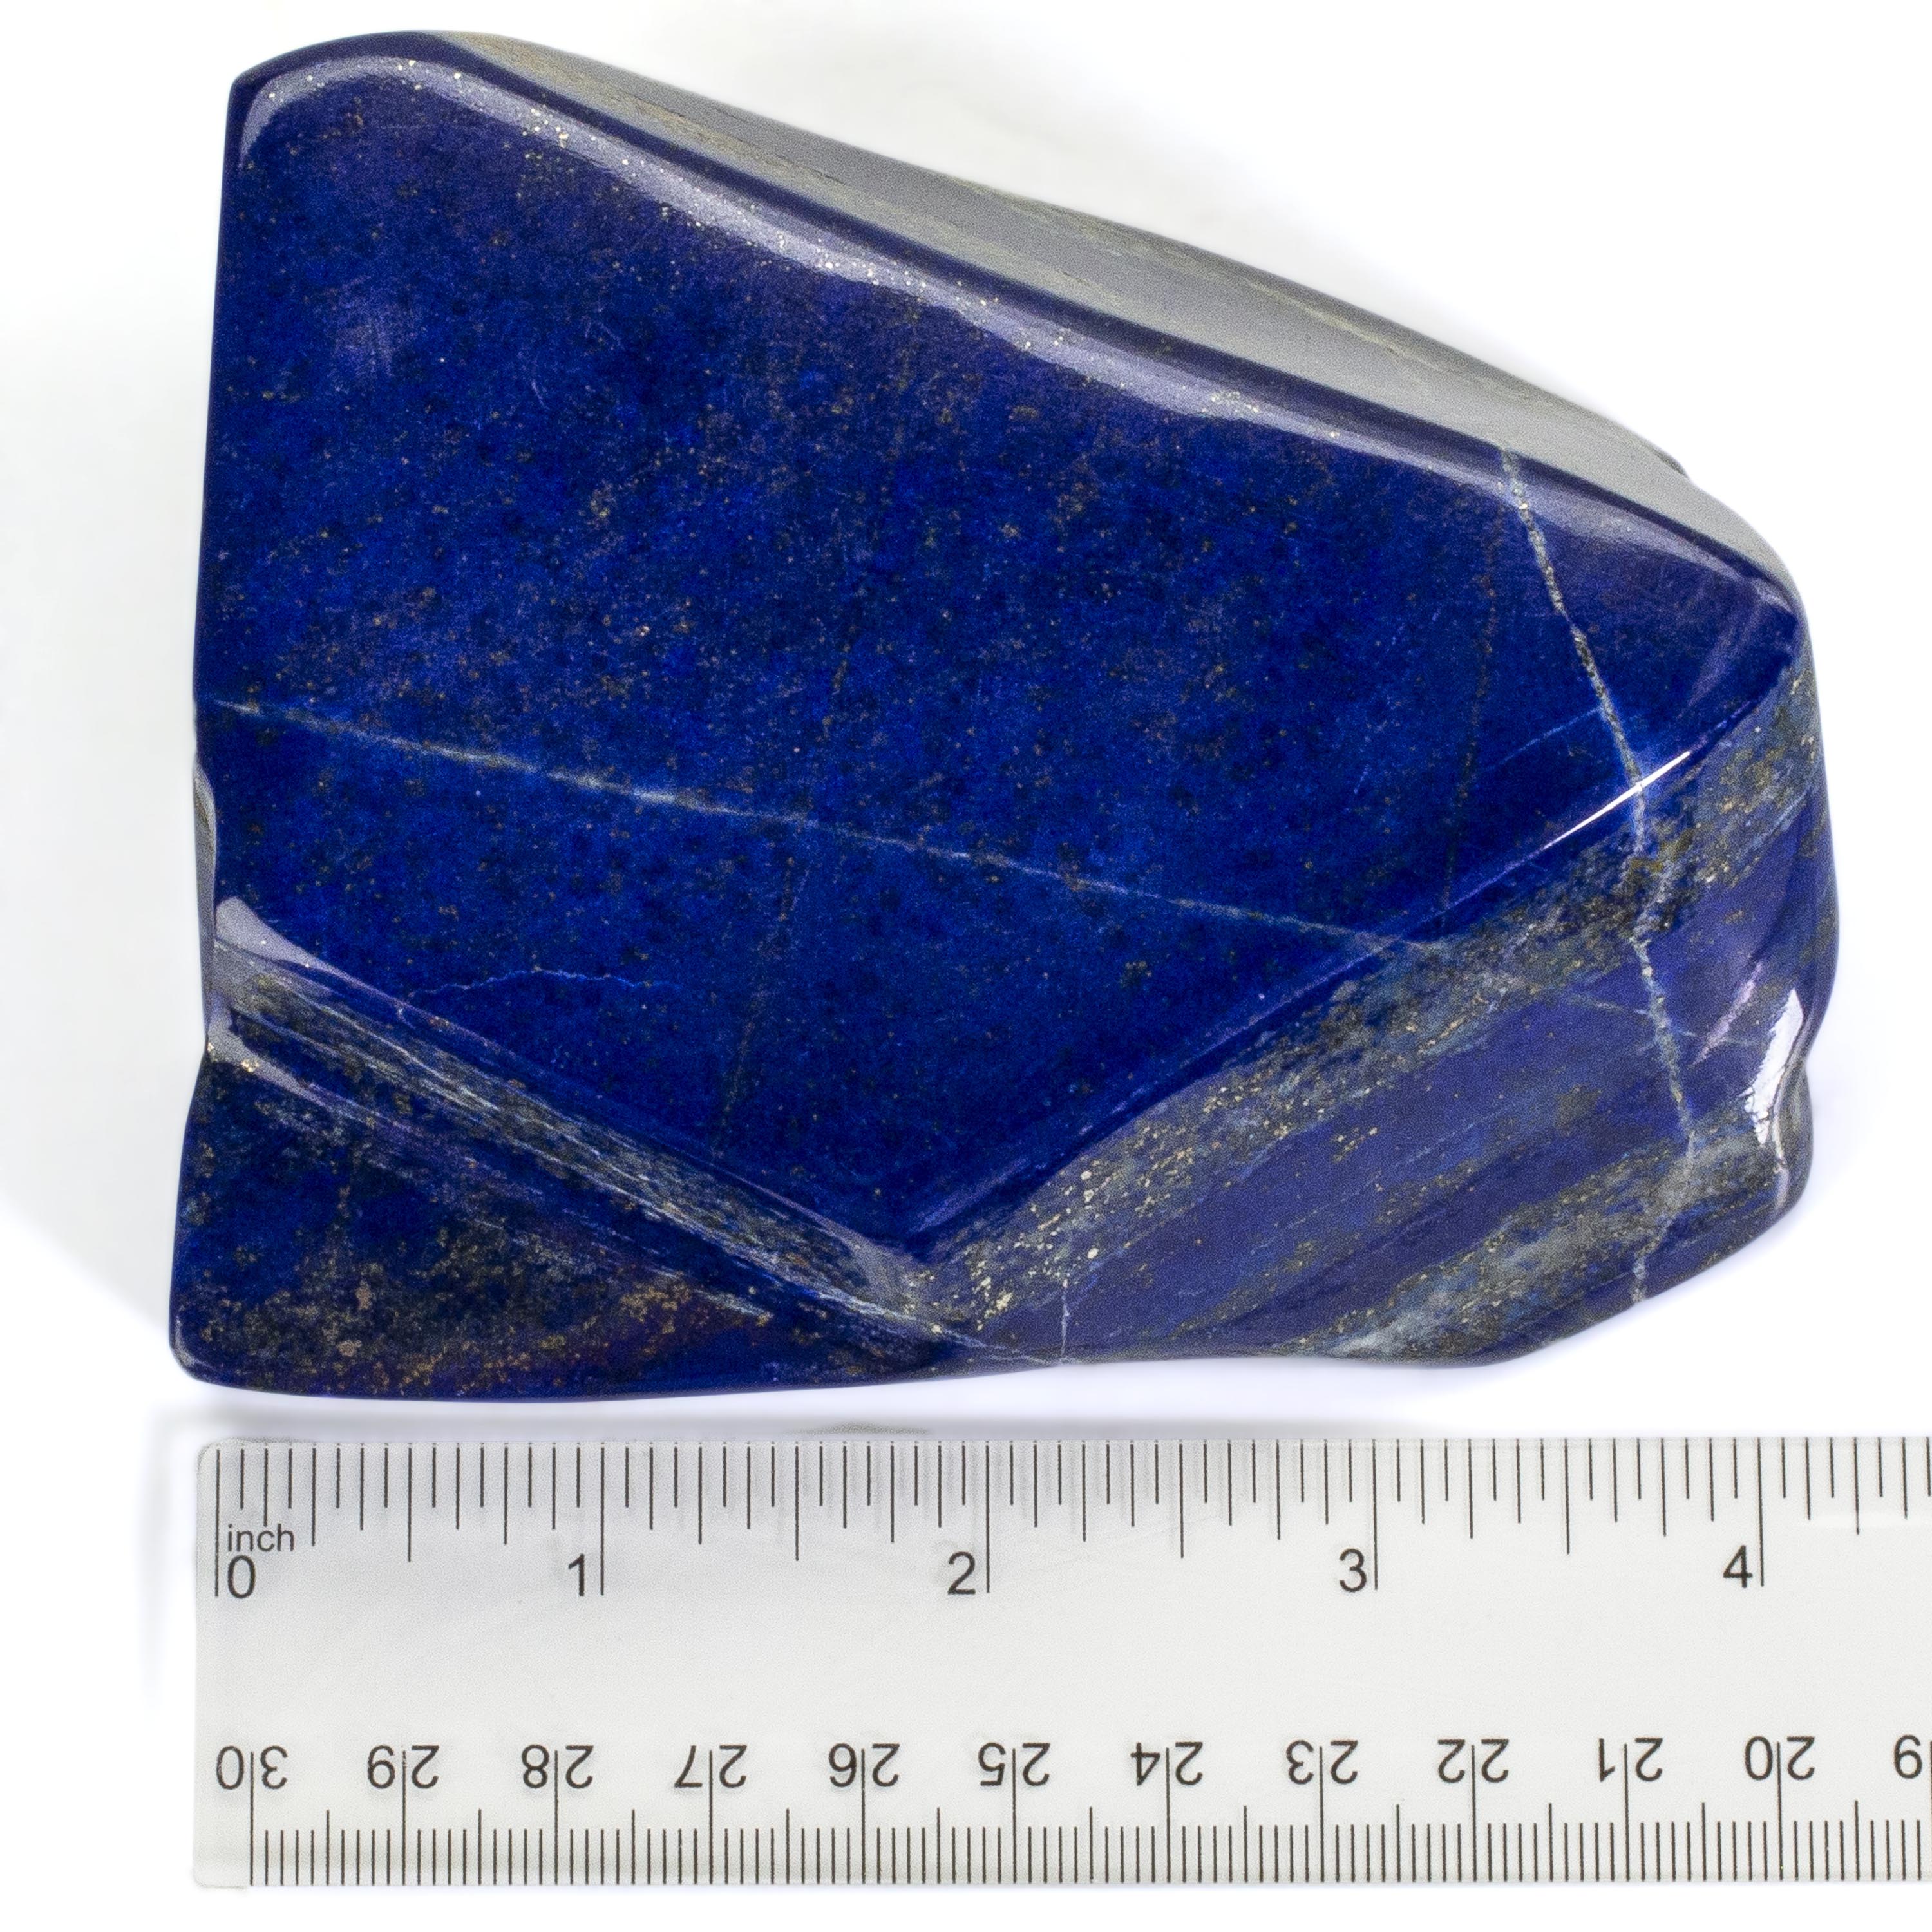 KALIFANO Lapis Lapis Lazuil Freeform from Afghanistan - 800 g / 1.8 lbs LP900.004